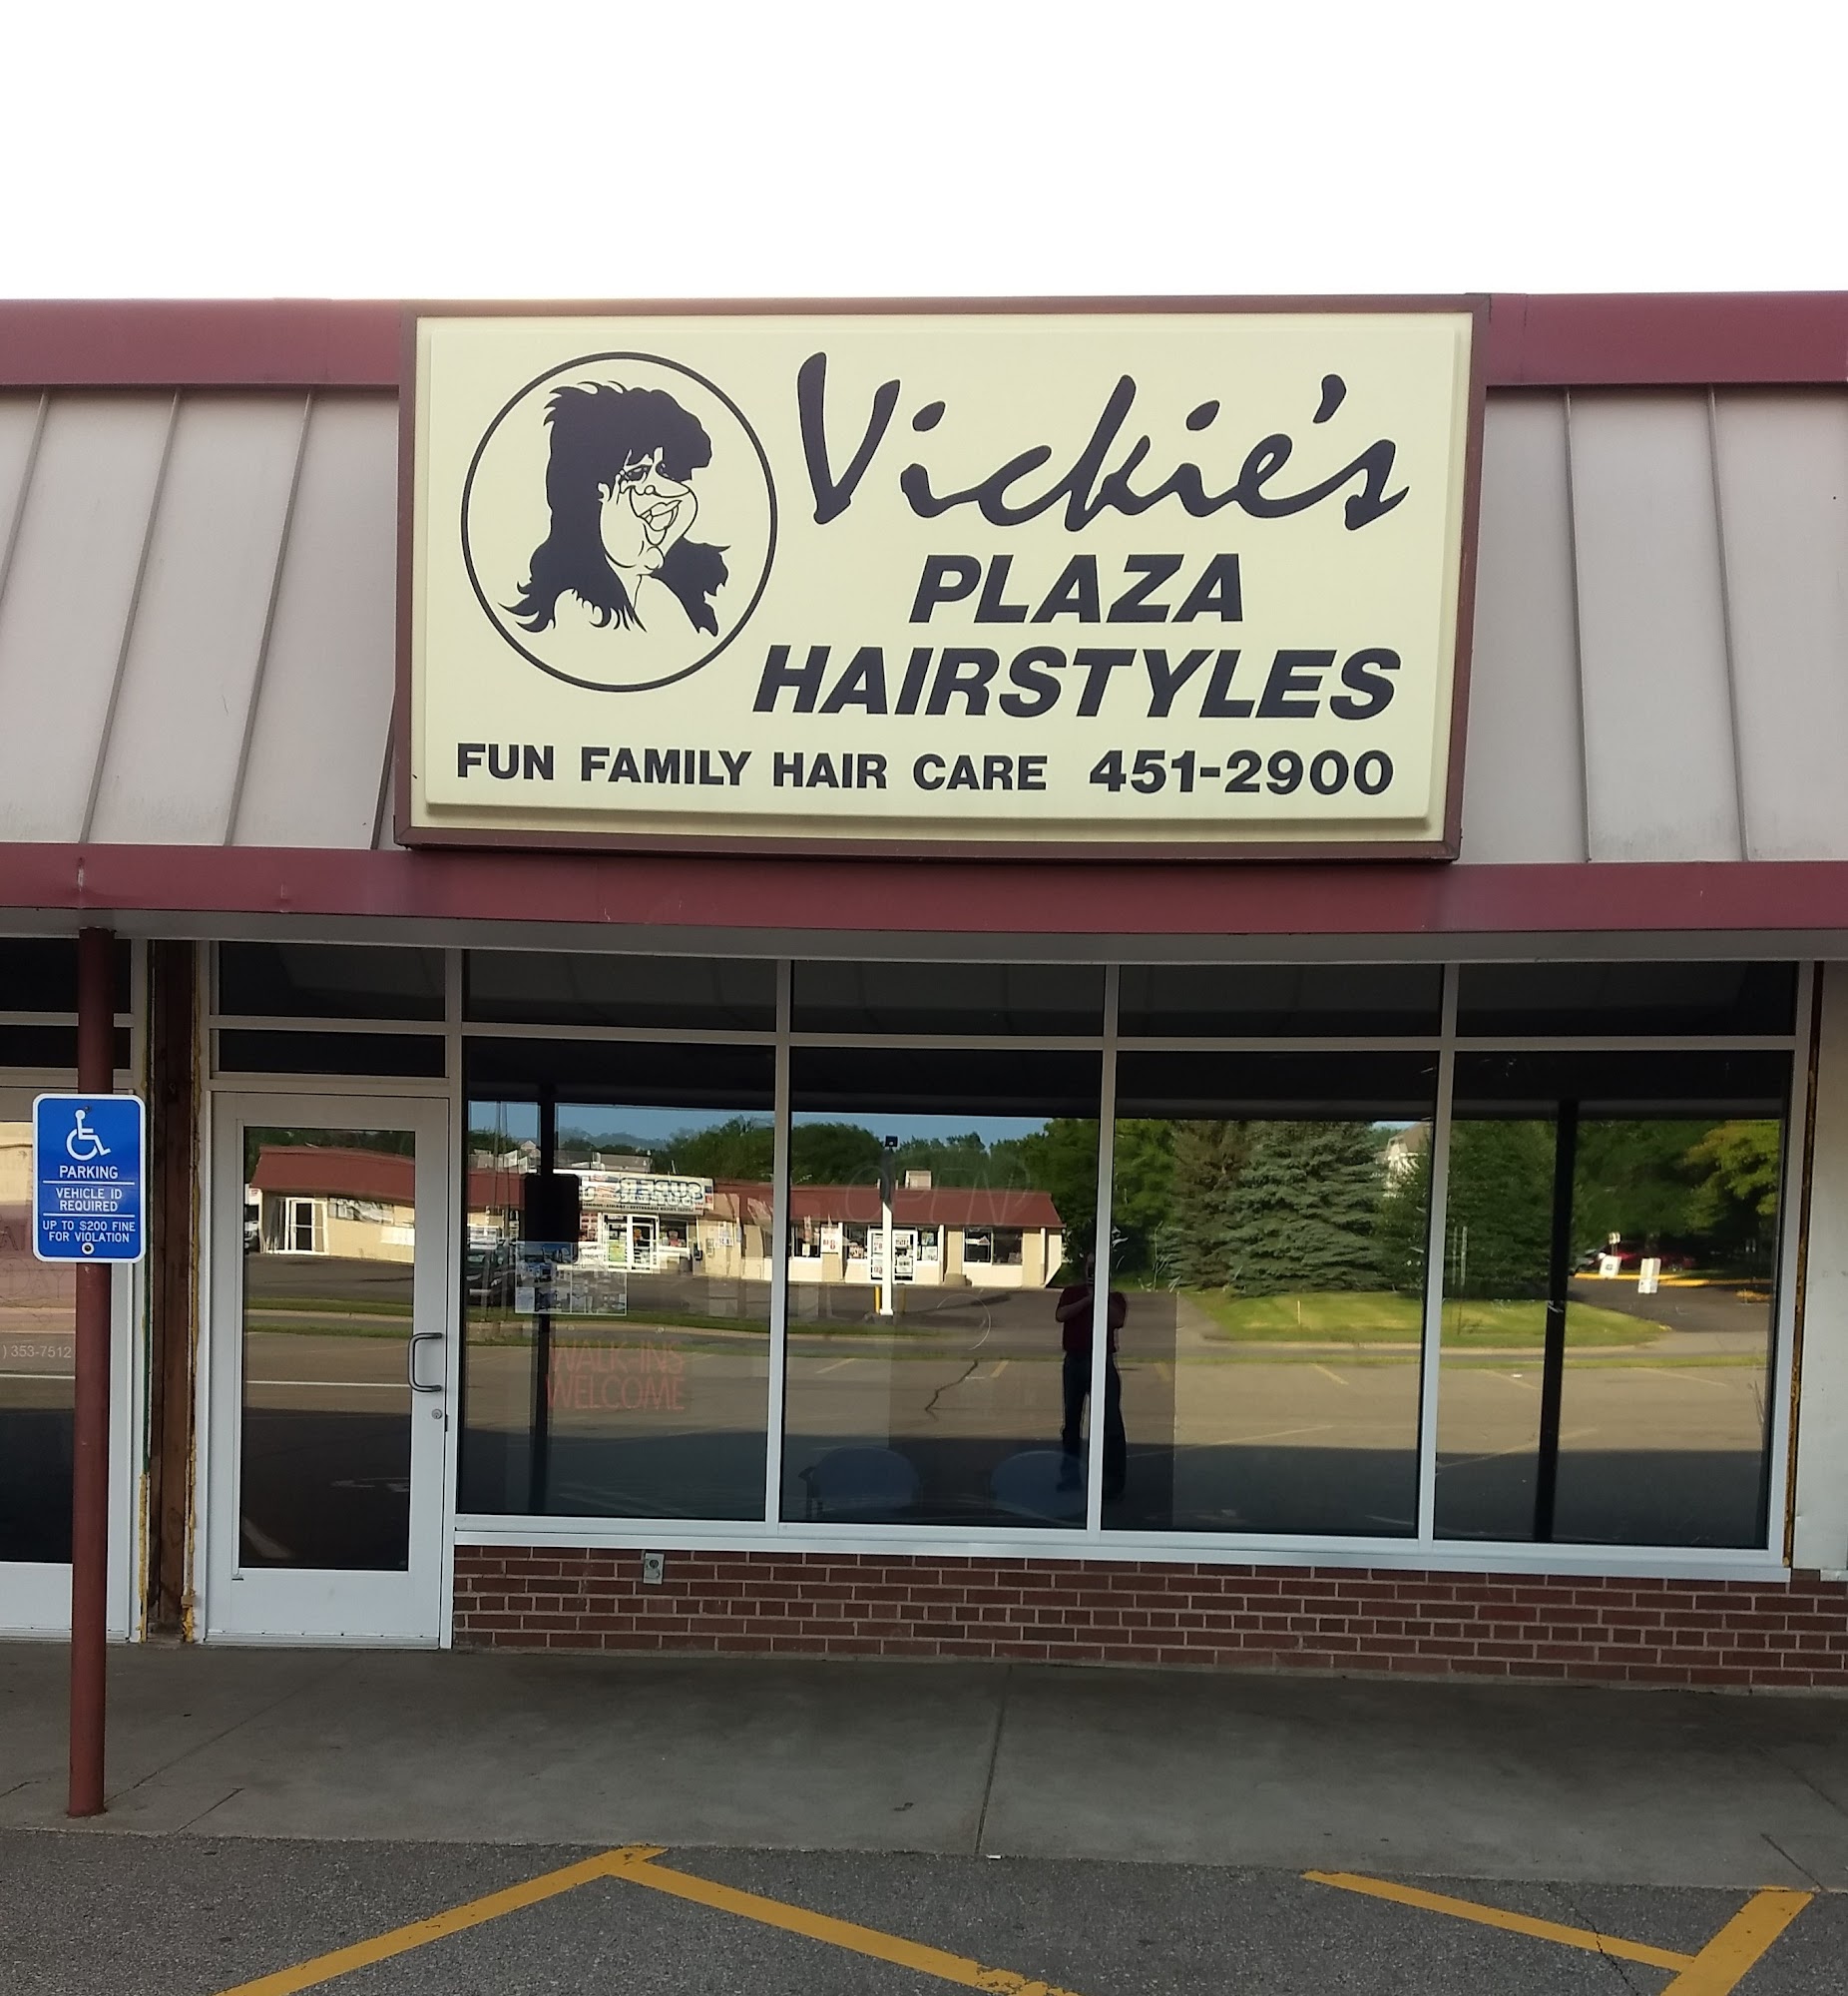 Vickie's Plaza Hairstyles 1525 5th Ave S, South St Paul Minnesota 55075